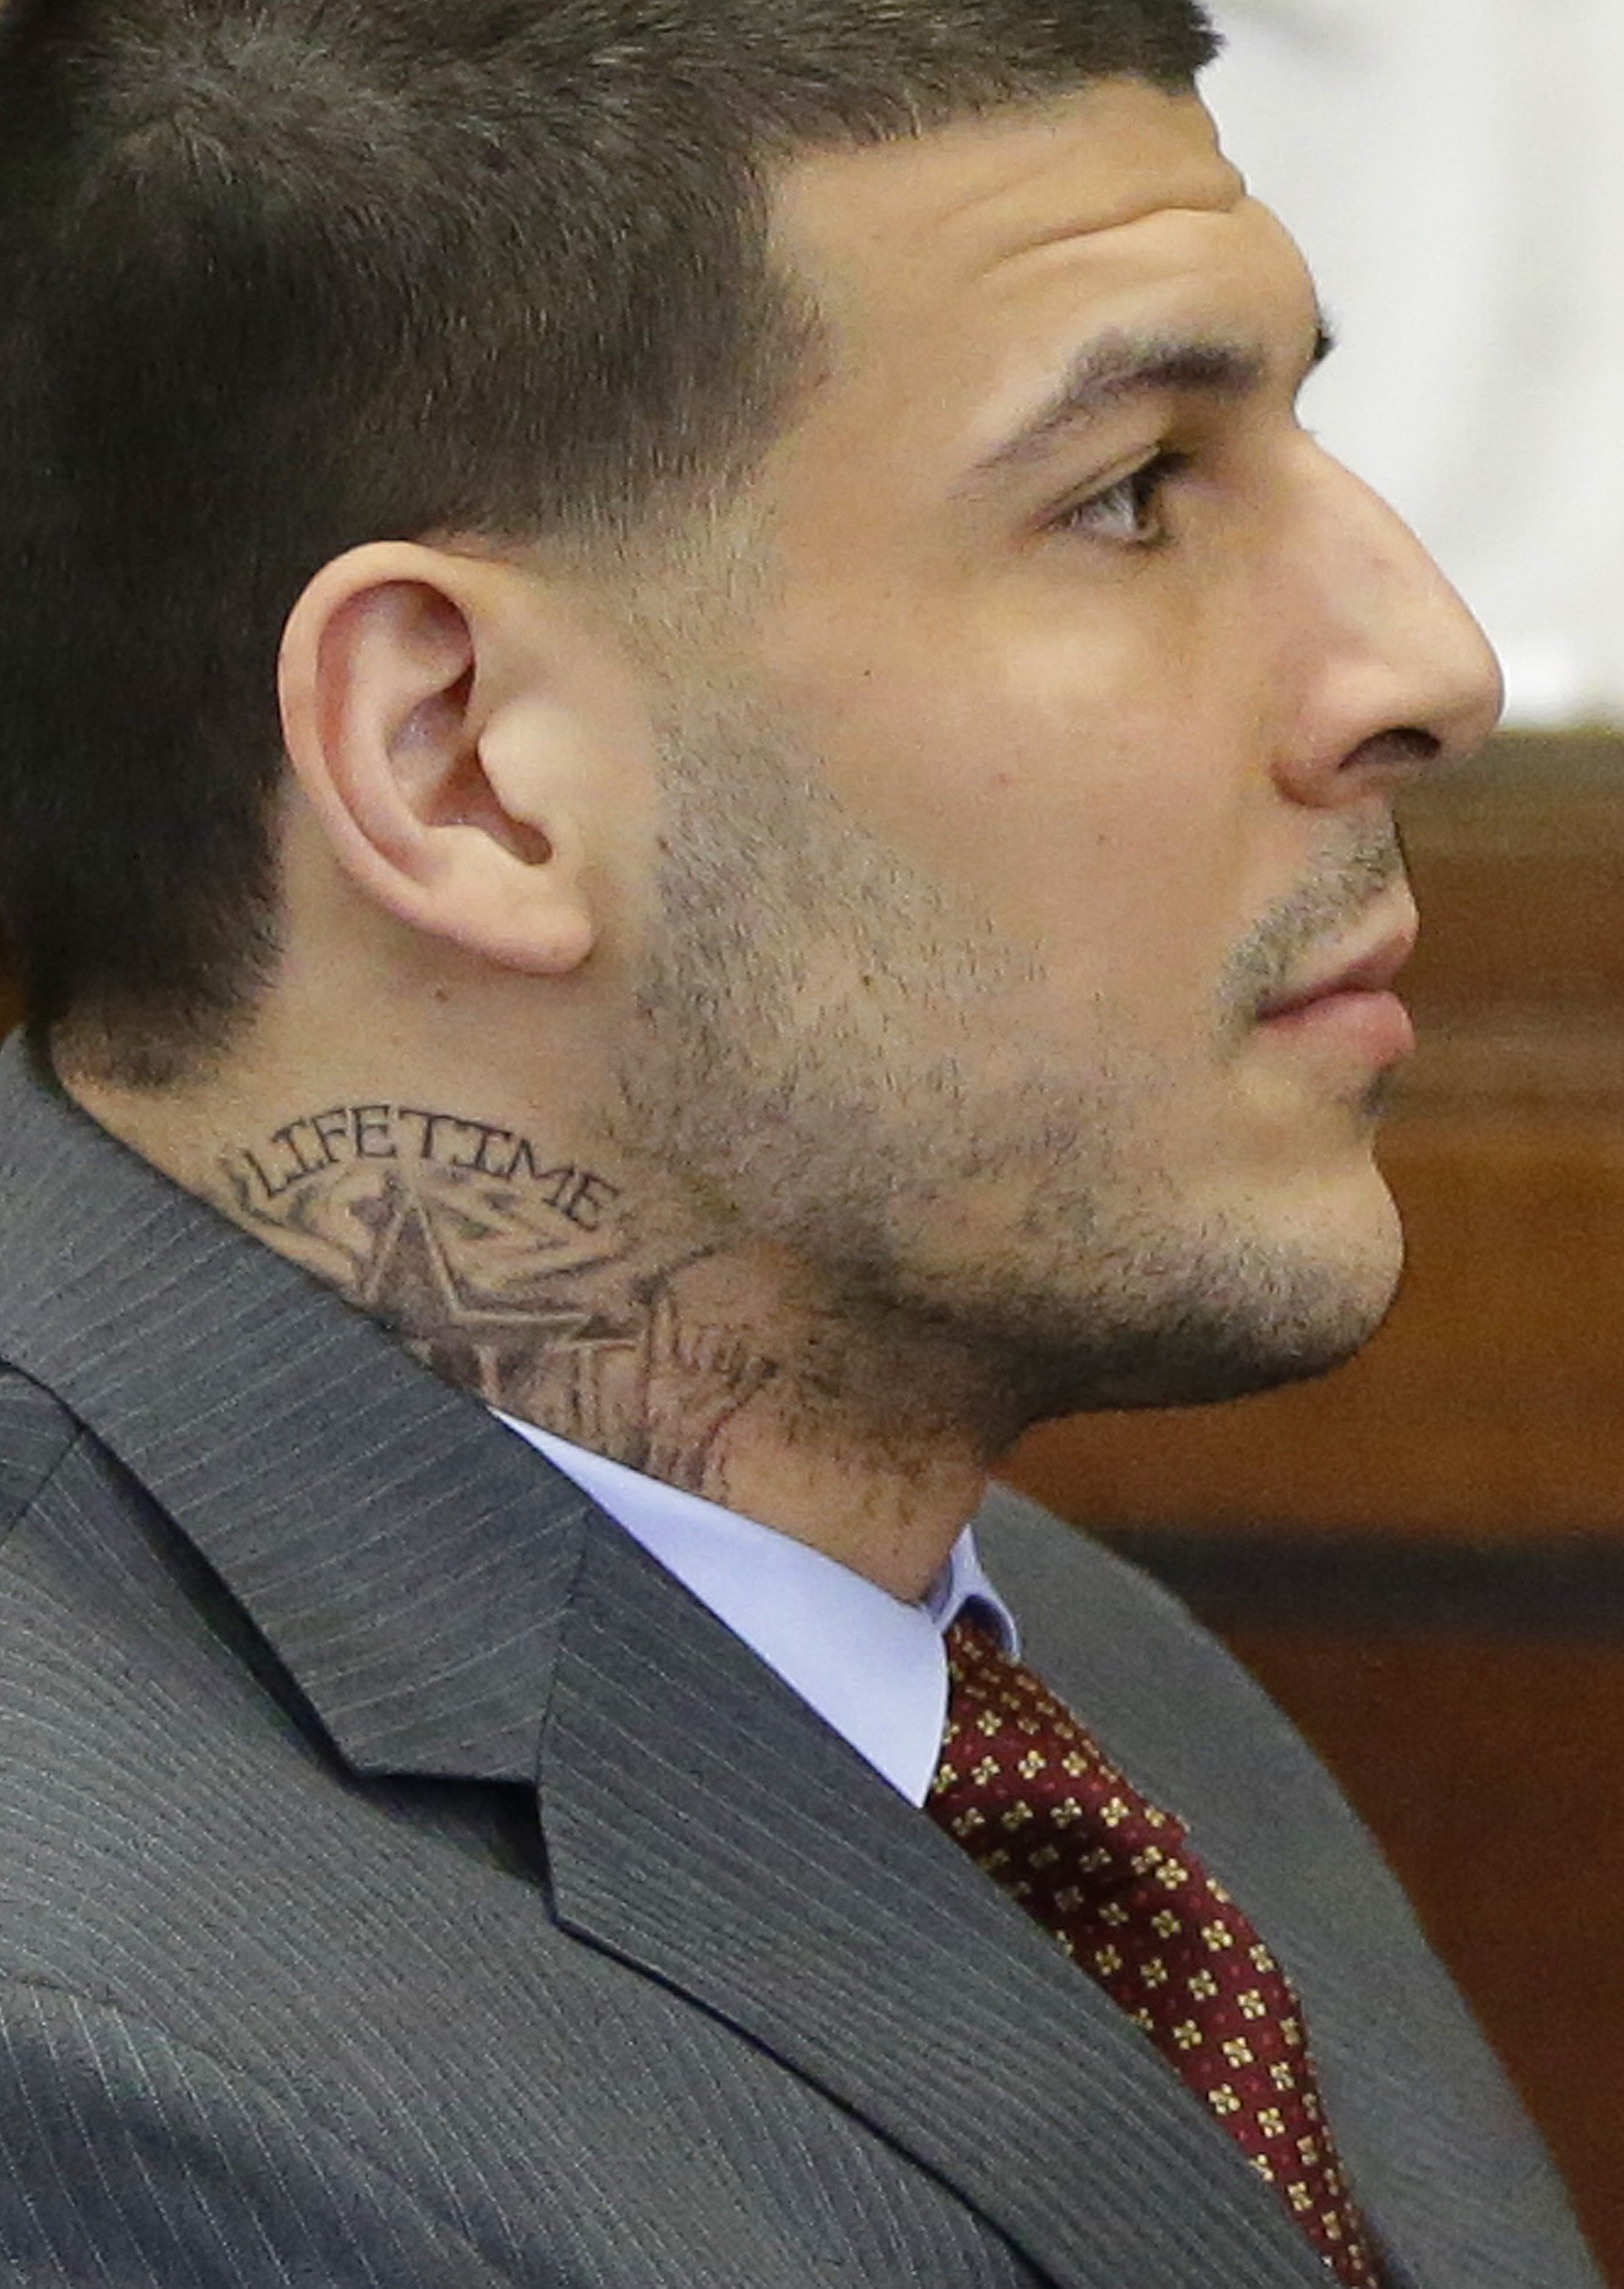 Sporting a new neck tattoo, former New England Patriots NFL football player Aaron Hernandez sits at the defense table during his arraignment on a charge of trying to silence a witness in a double murder case against him by shooting the man in the face at Suffolk Superior Court on May 21, 2015, in Boston.